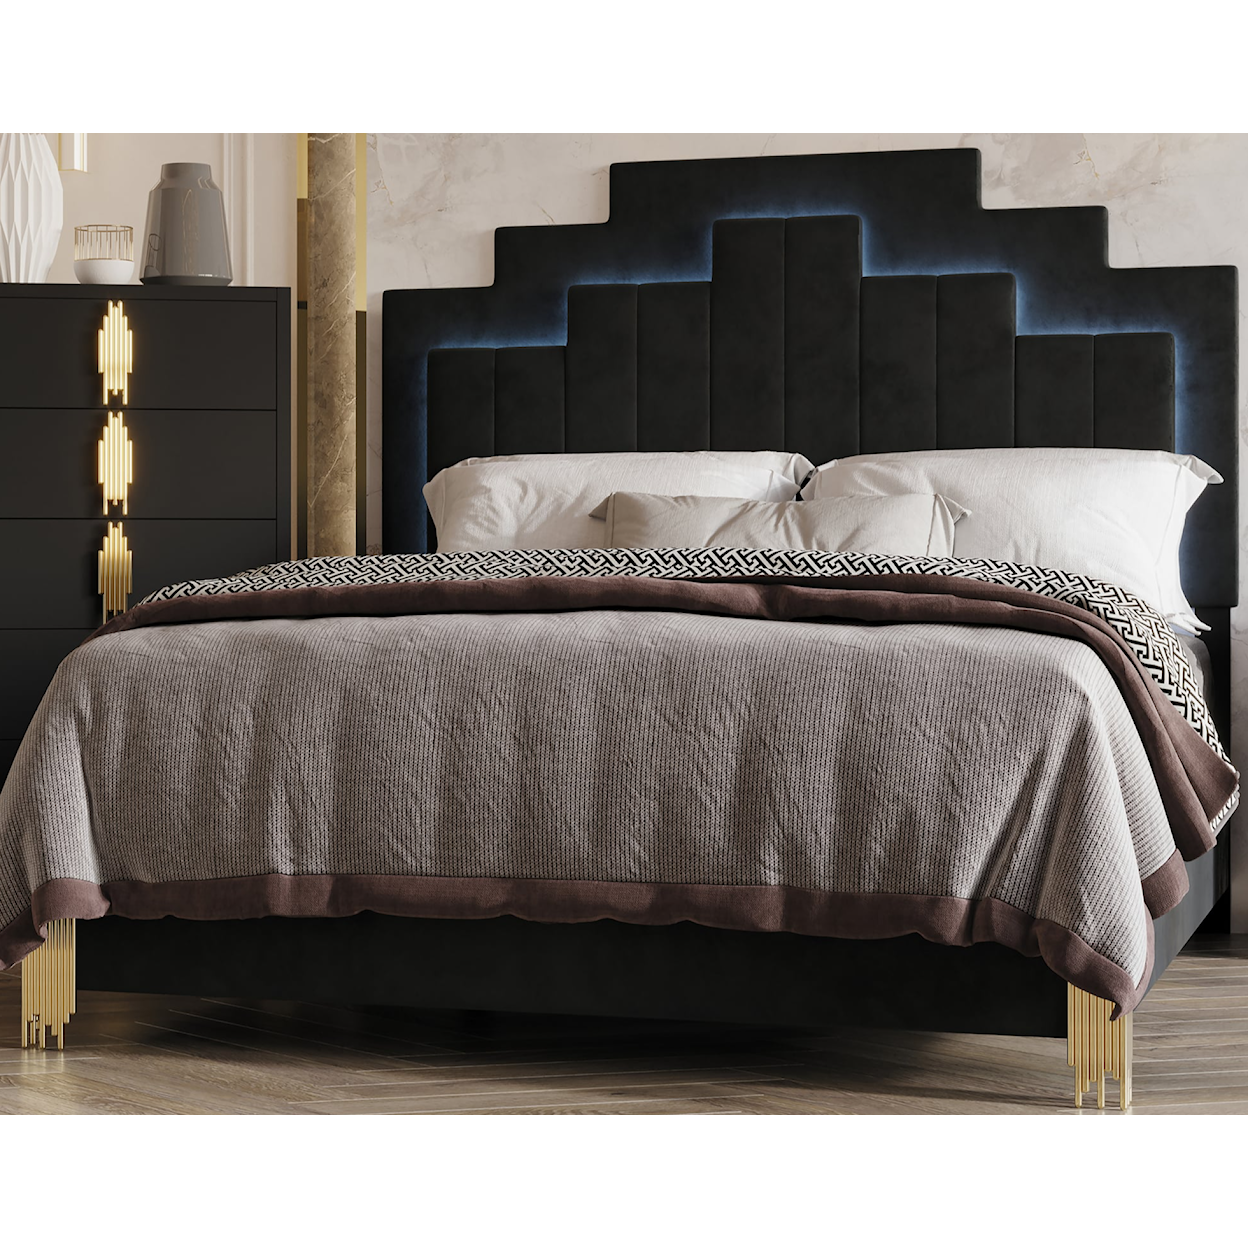 New Classic New York NEW YORK BLACK QUEEN BED |